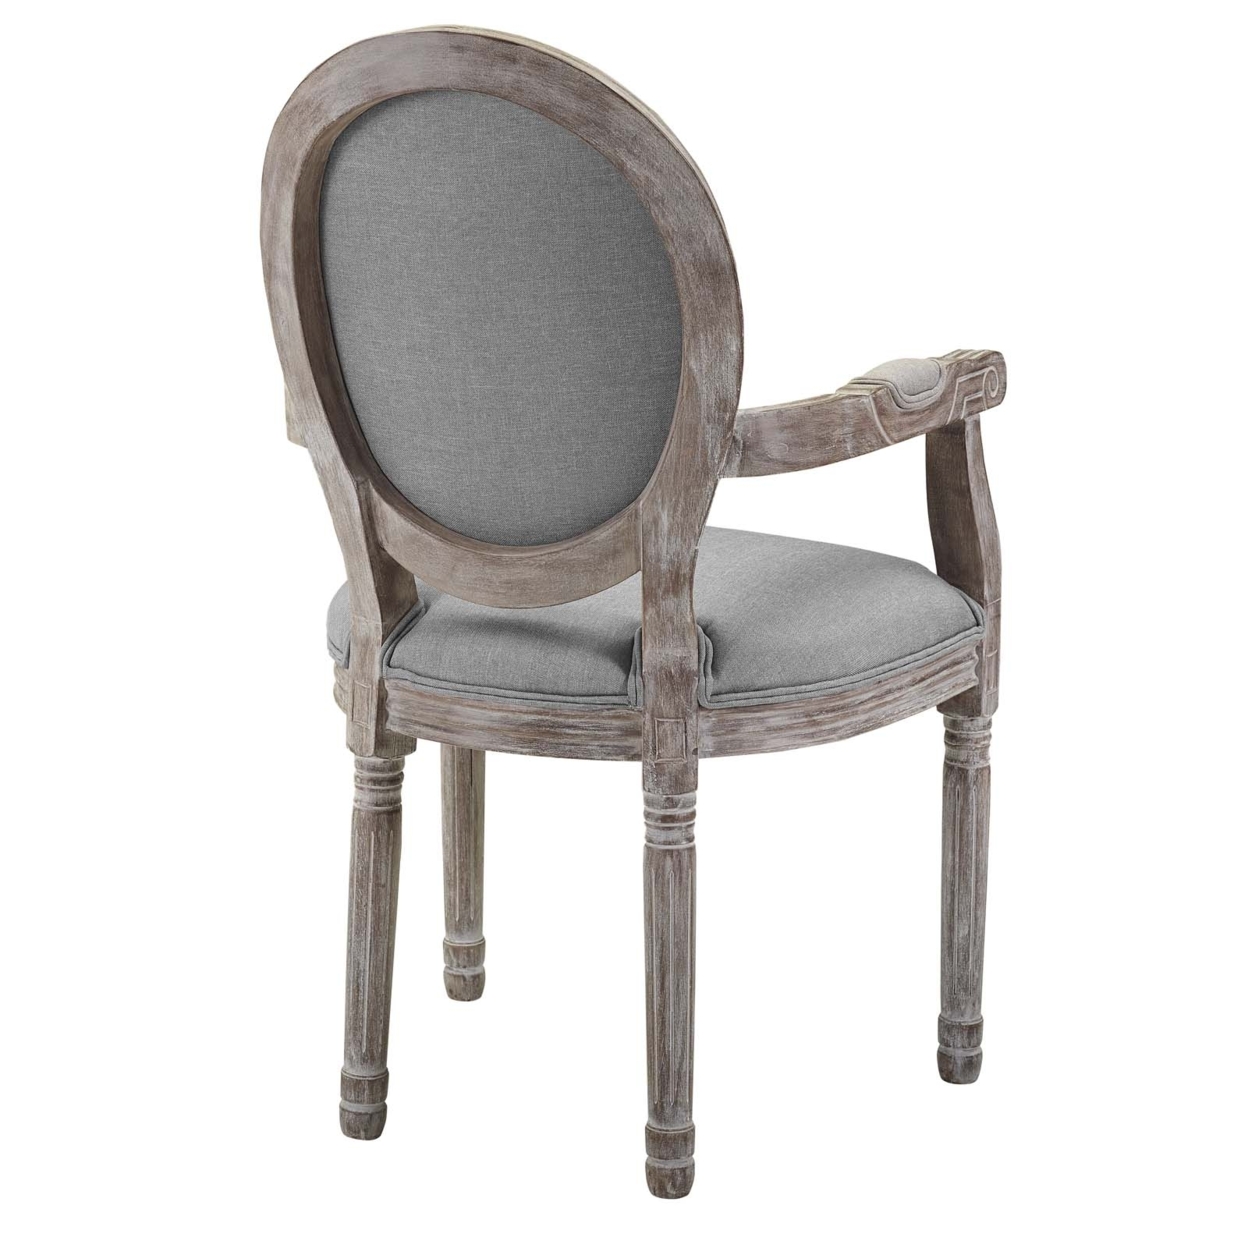 Emanate Vintage French Upholstered Fabric Dining Armchair, Light Gray